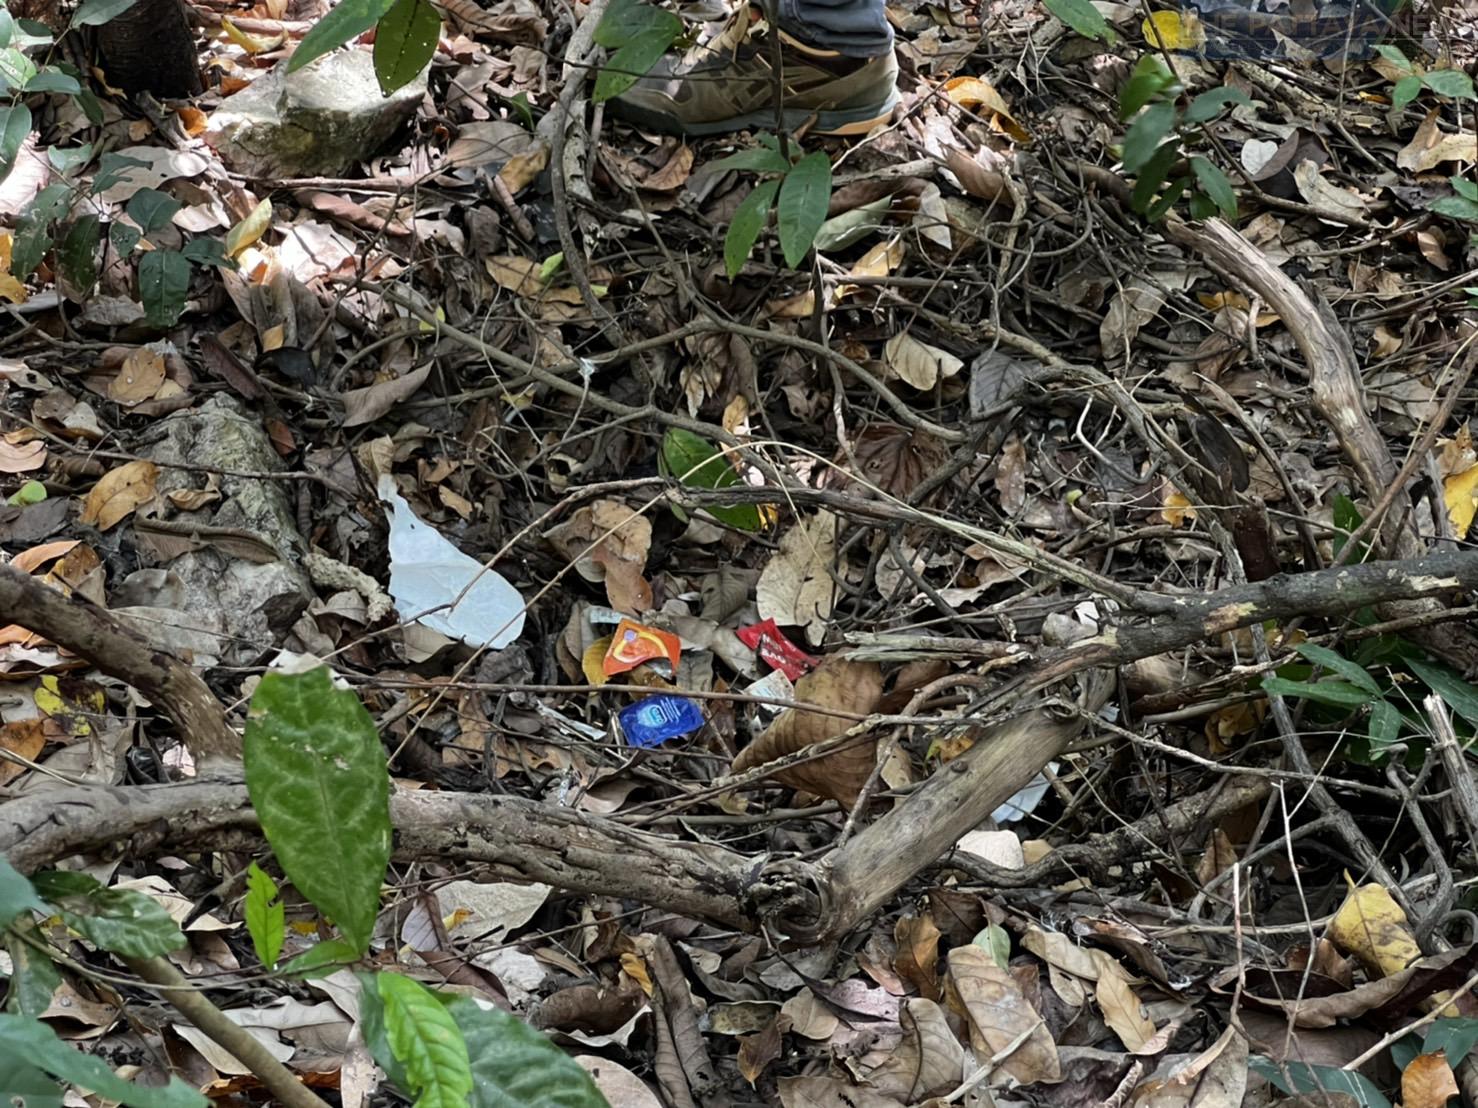 Local residents outraged after several used condoms and toilet papers found scattered in Pattaya public park